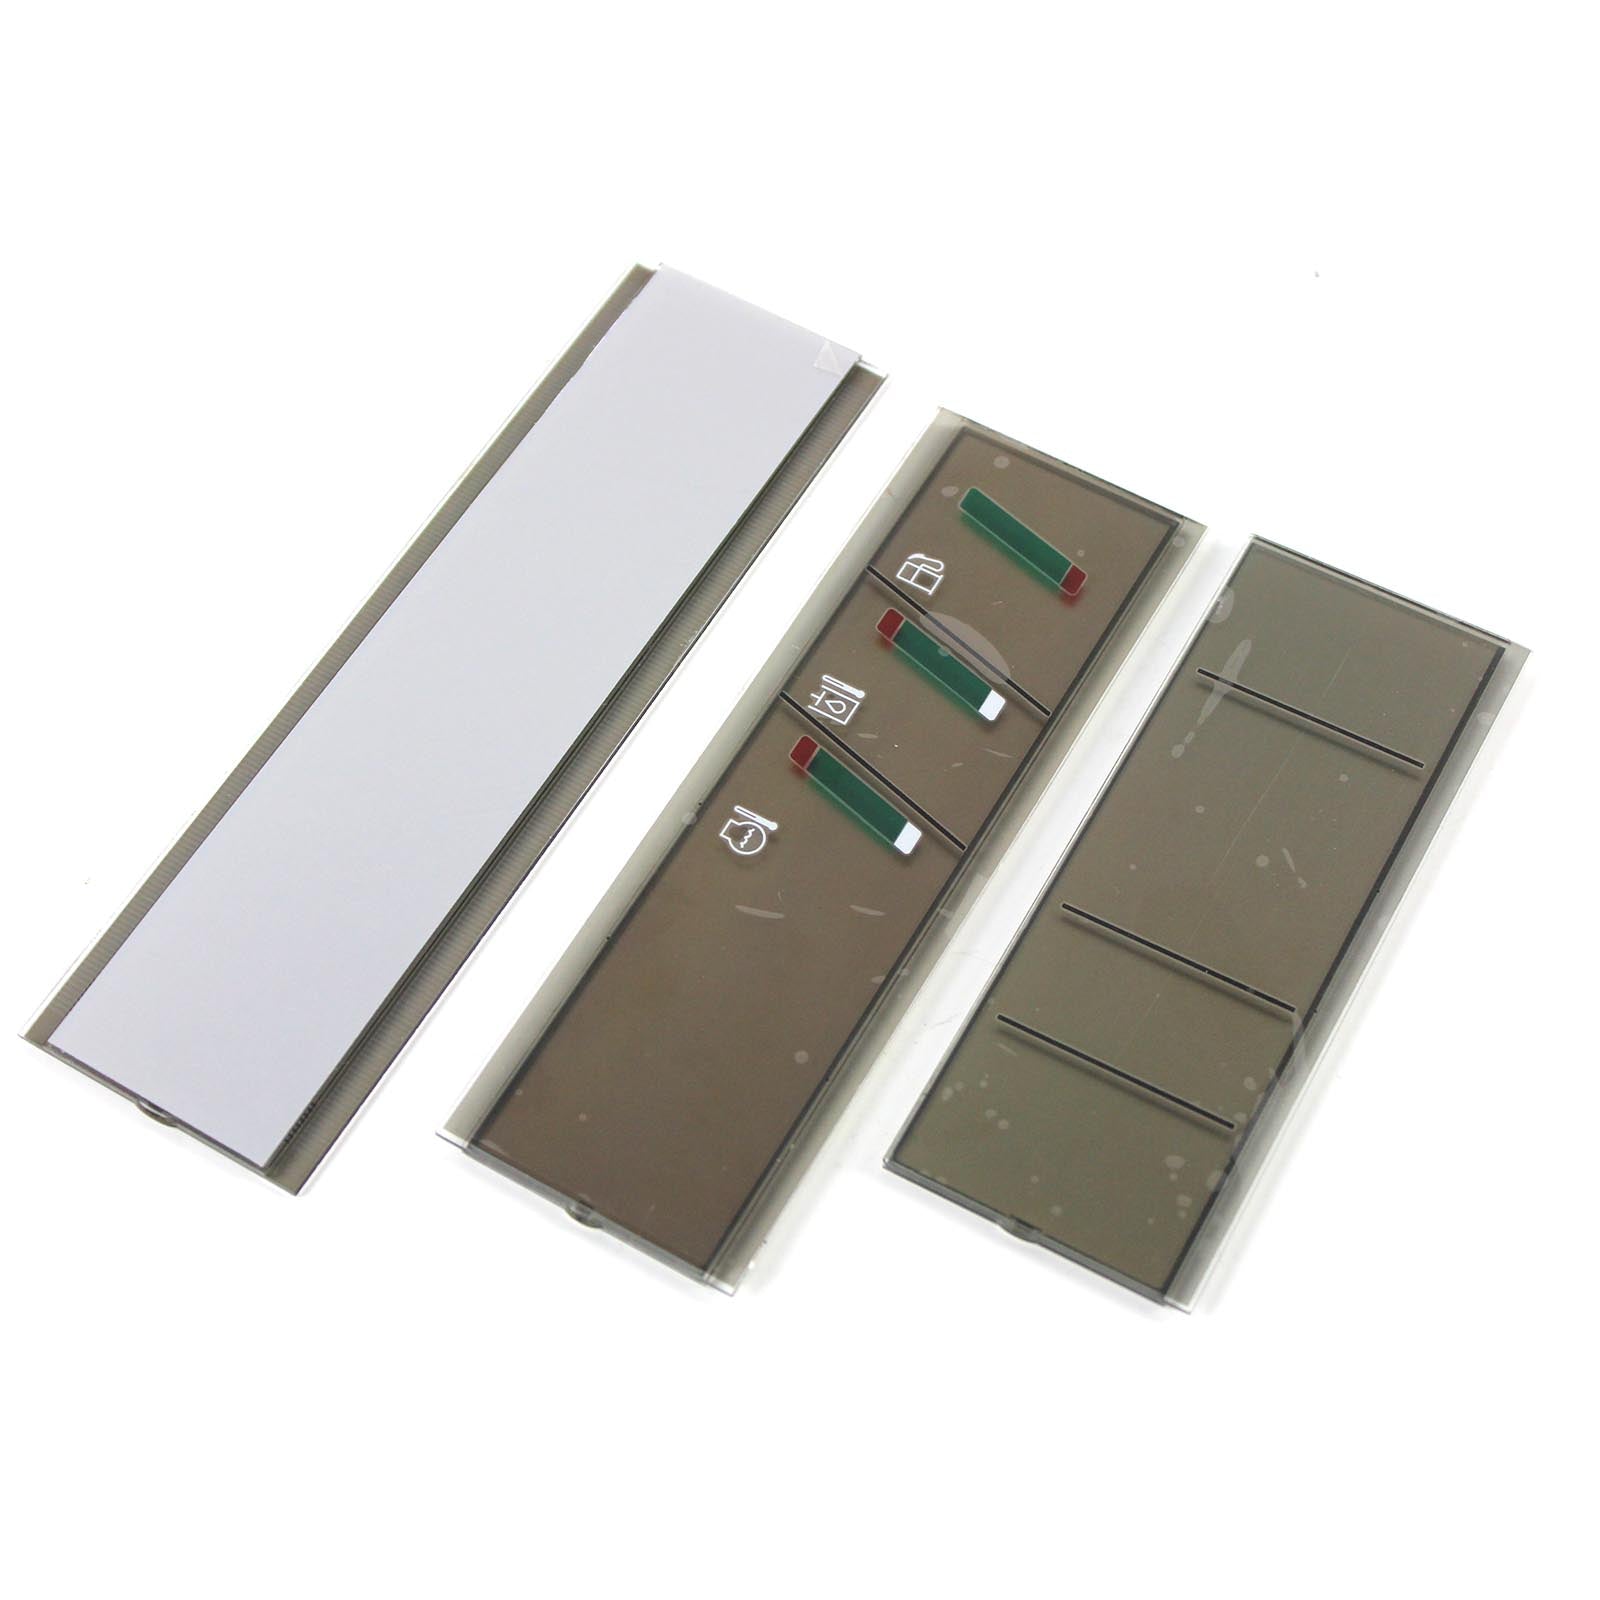 Monitor LCD Panel for Sumitomo A1 A2 SH-1 SH-2 - Sinocmp